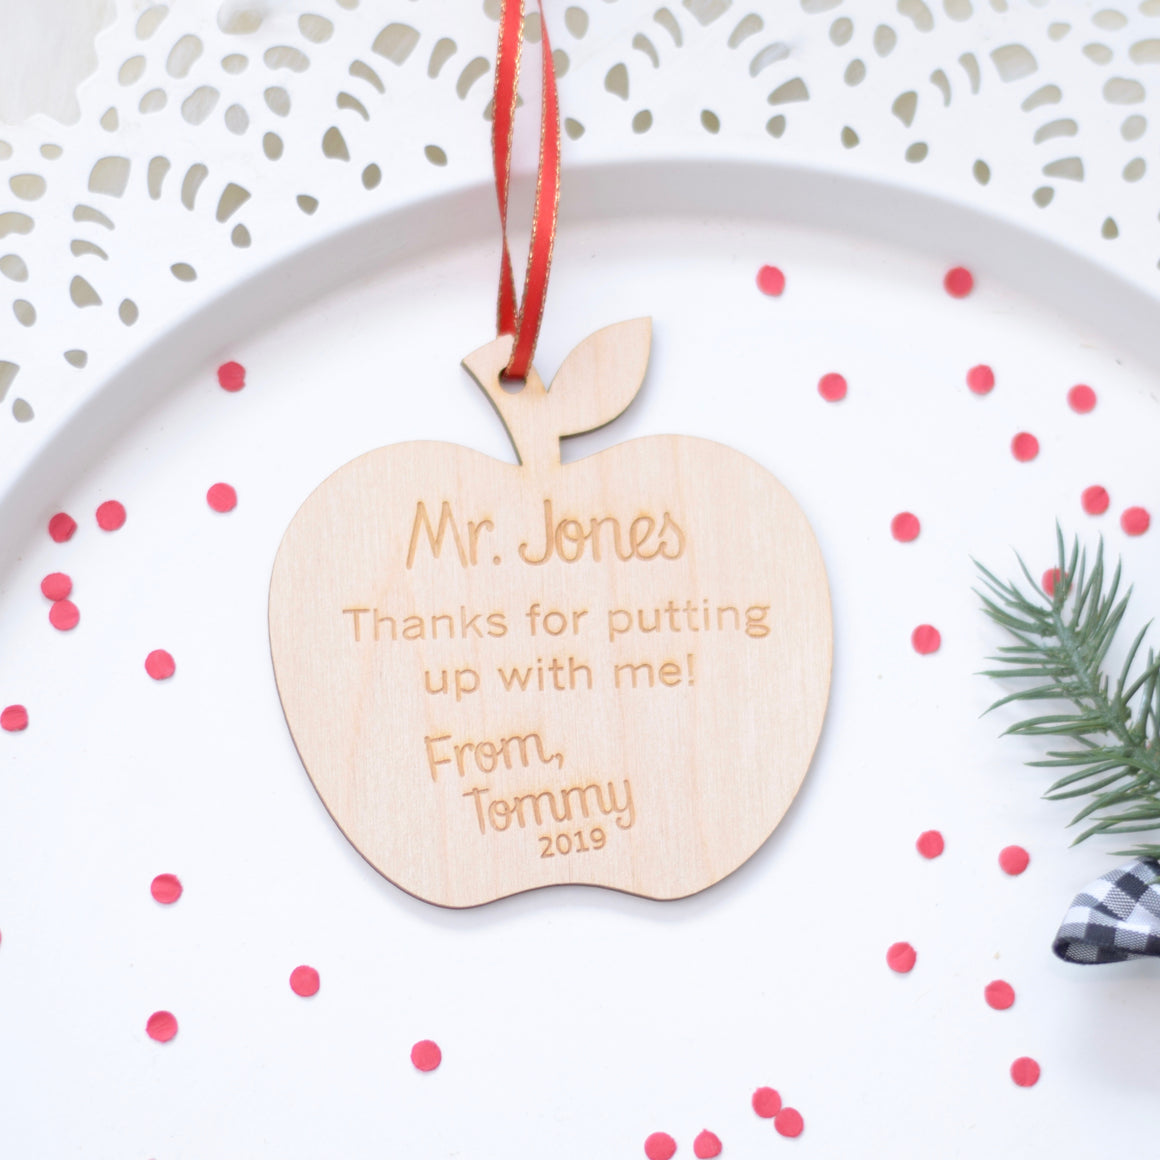 Apple Christmas tree ornament placed on a white cake plate with red confetti and Christmas greenery